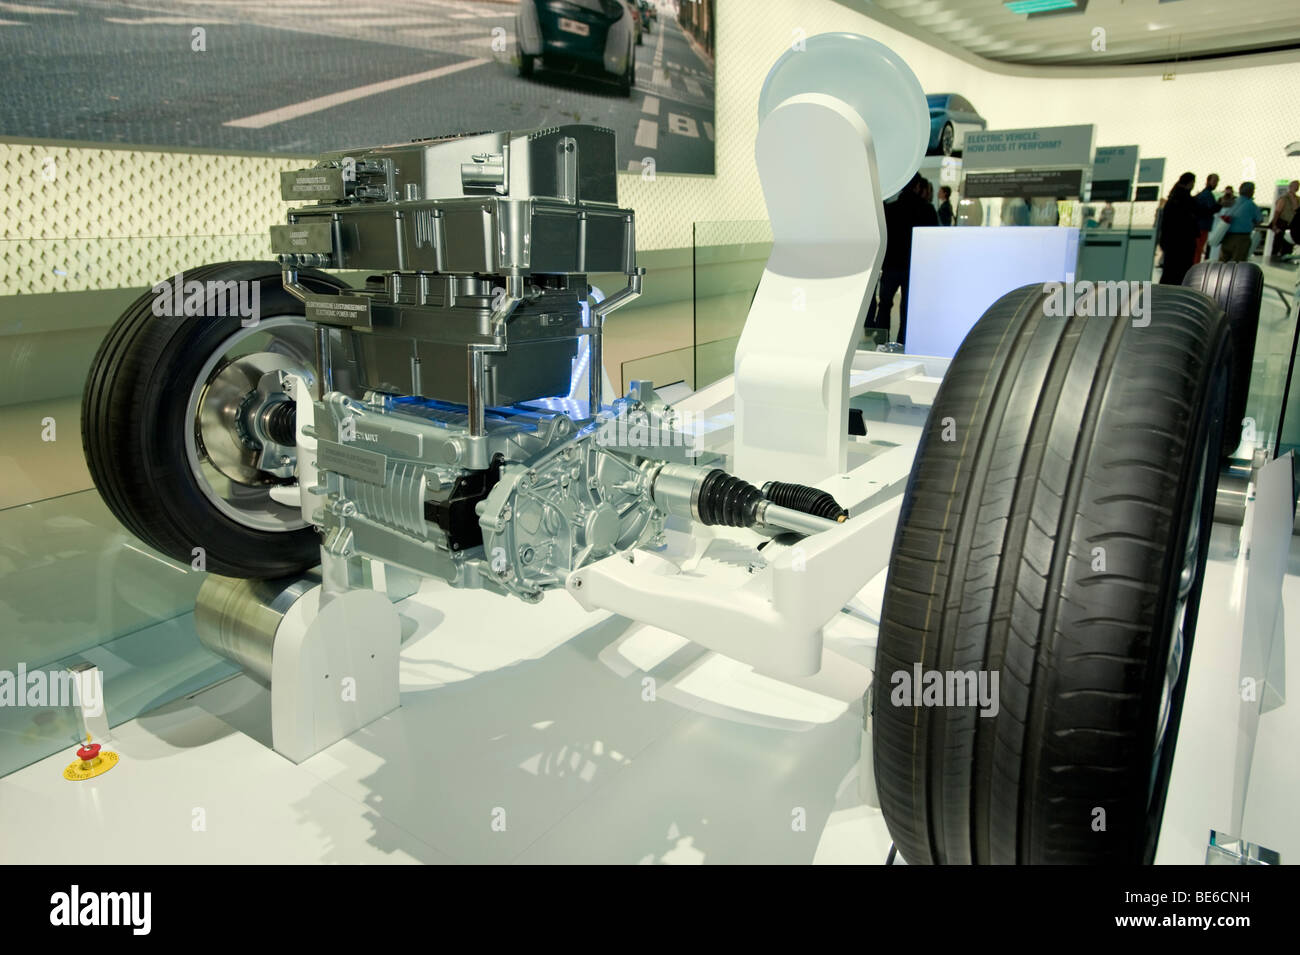 Demonstration model of new electric engine and chassis designed by Renault at the Frankfurt Motor Show 2009 Stock Photo